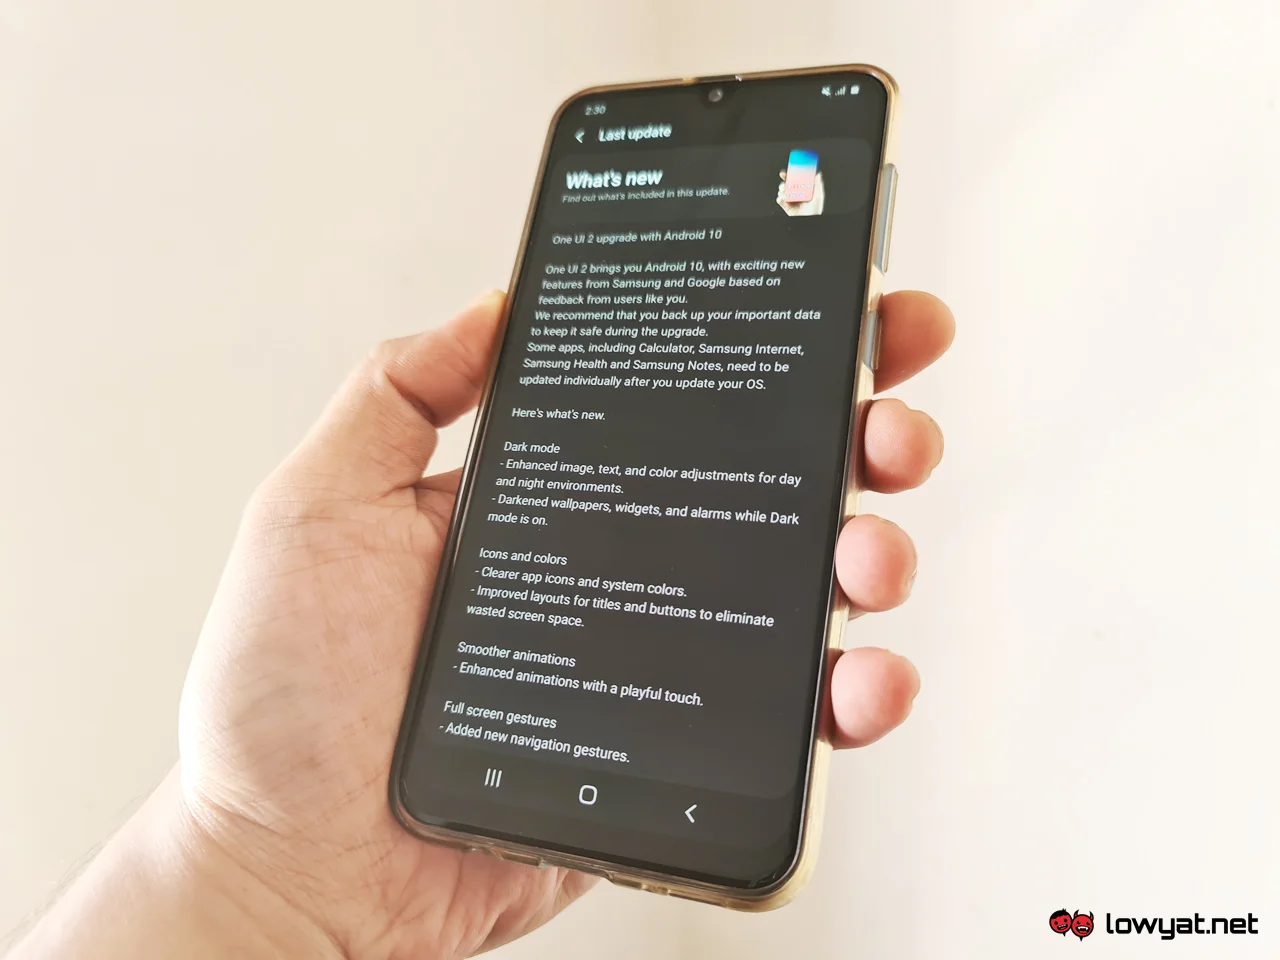 Samsung Note 10 Plus A50 Android 10 One UI update